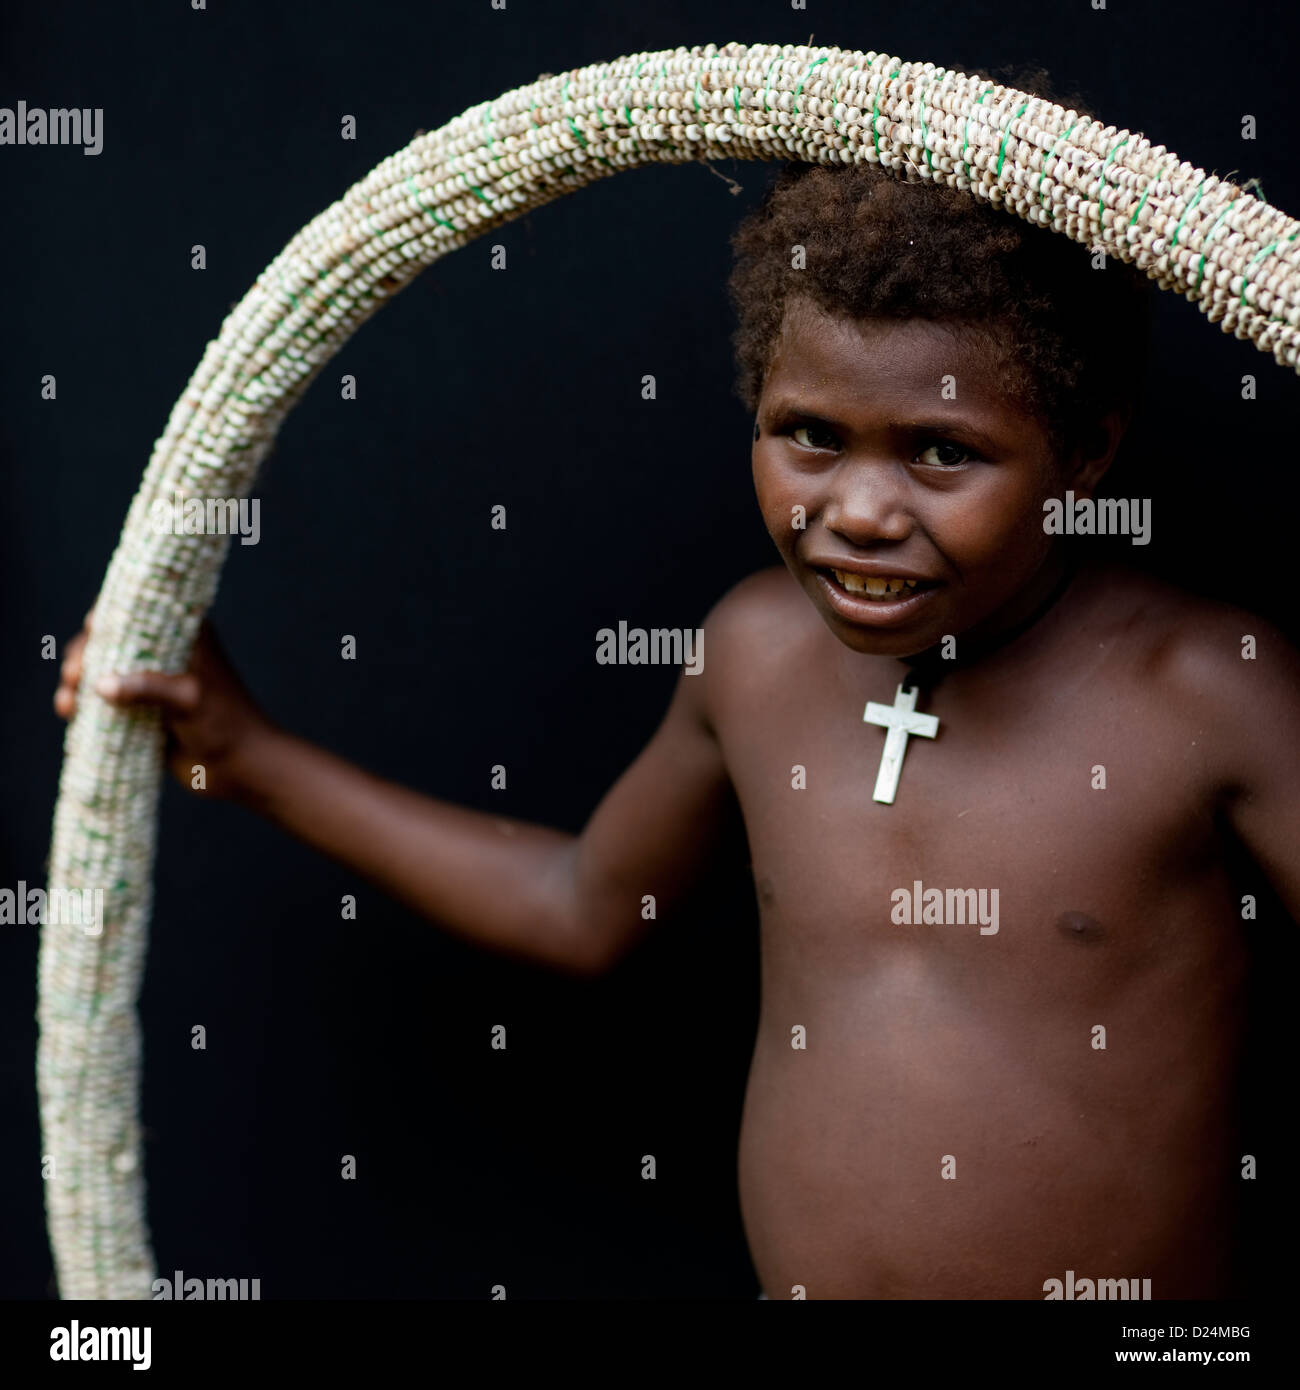 Girl Holding A Giant Shell Money, East New Britain, Papua New Guinea Stock Photo